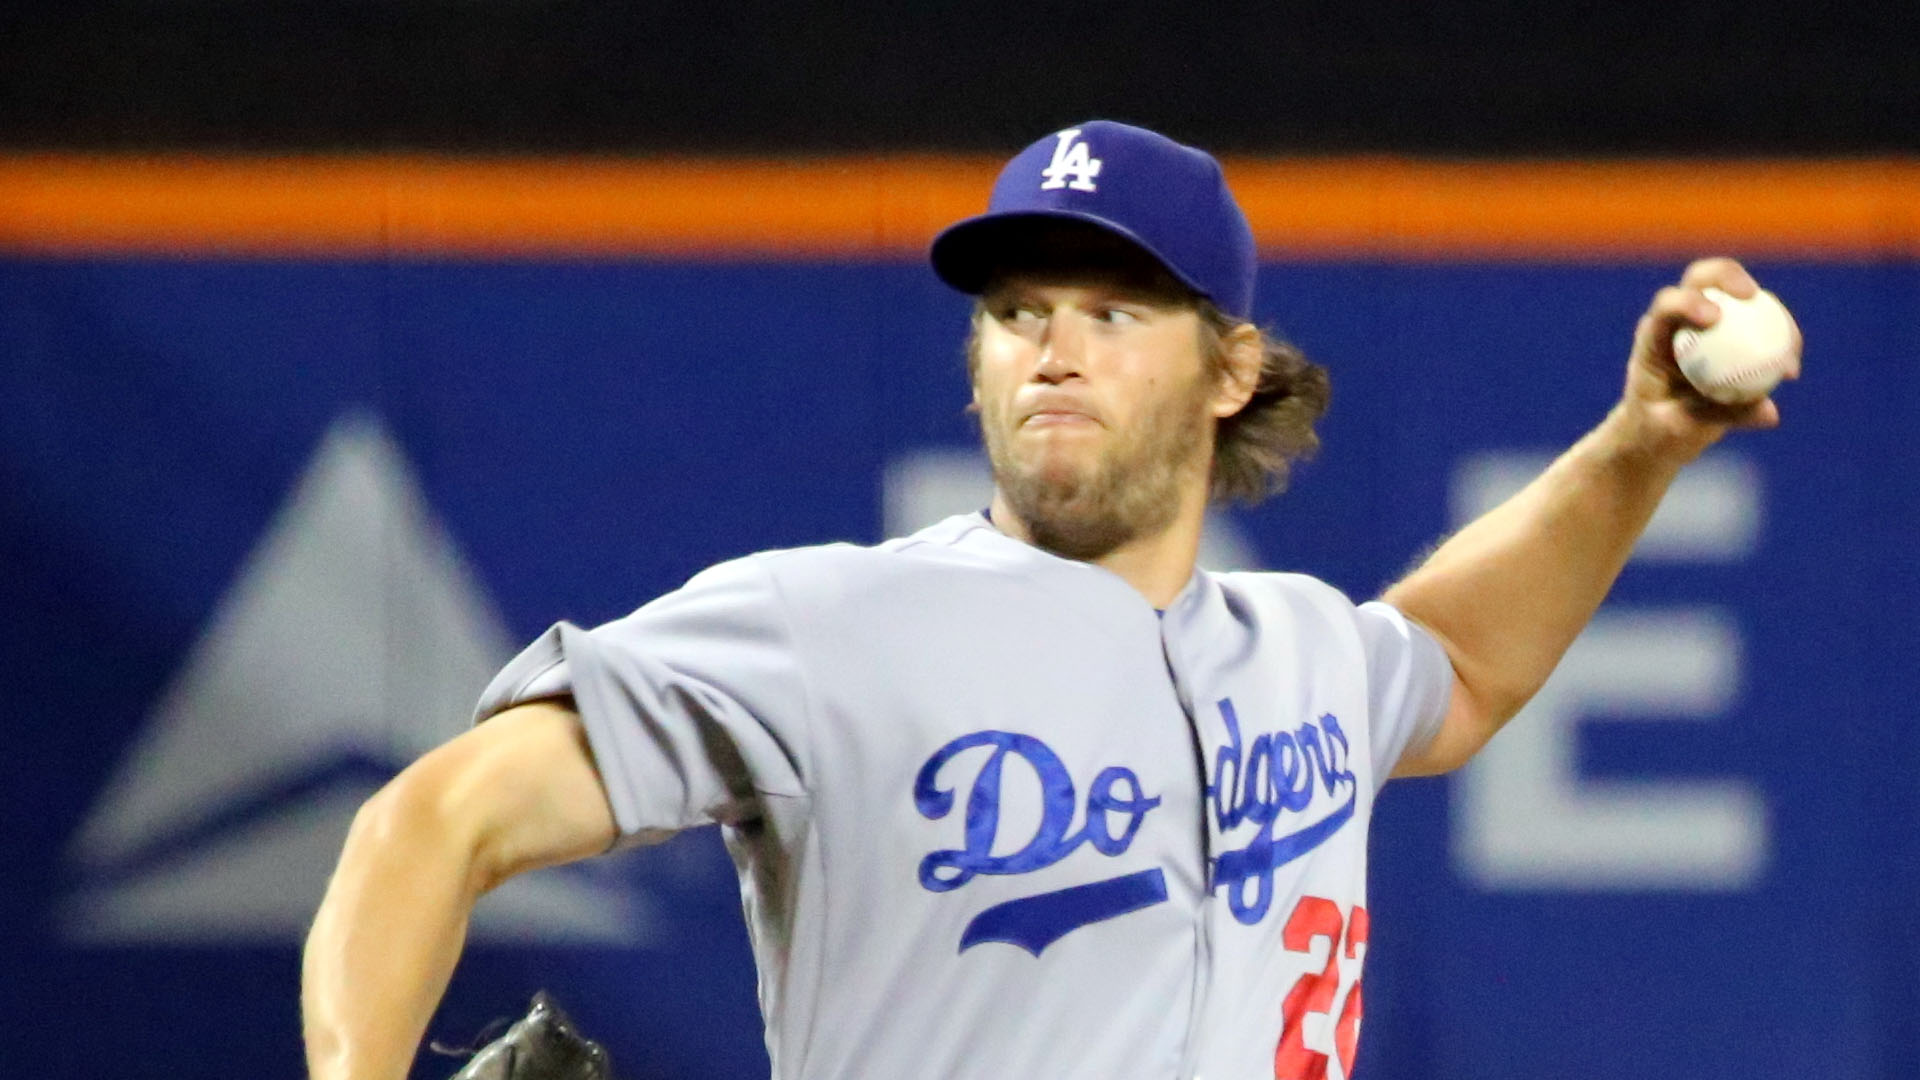 Clayton Kershaw of the Los Angeles Dodgers